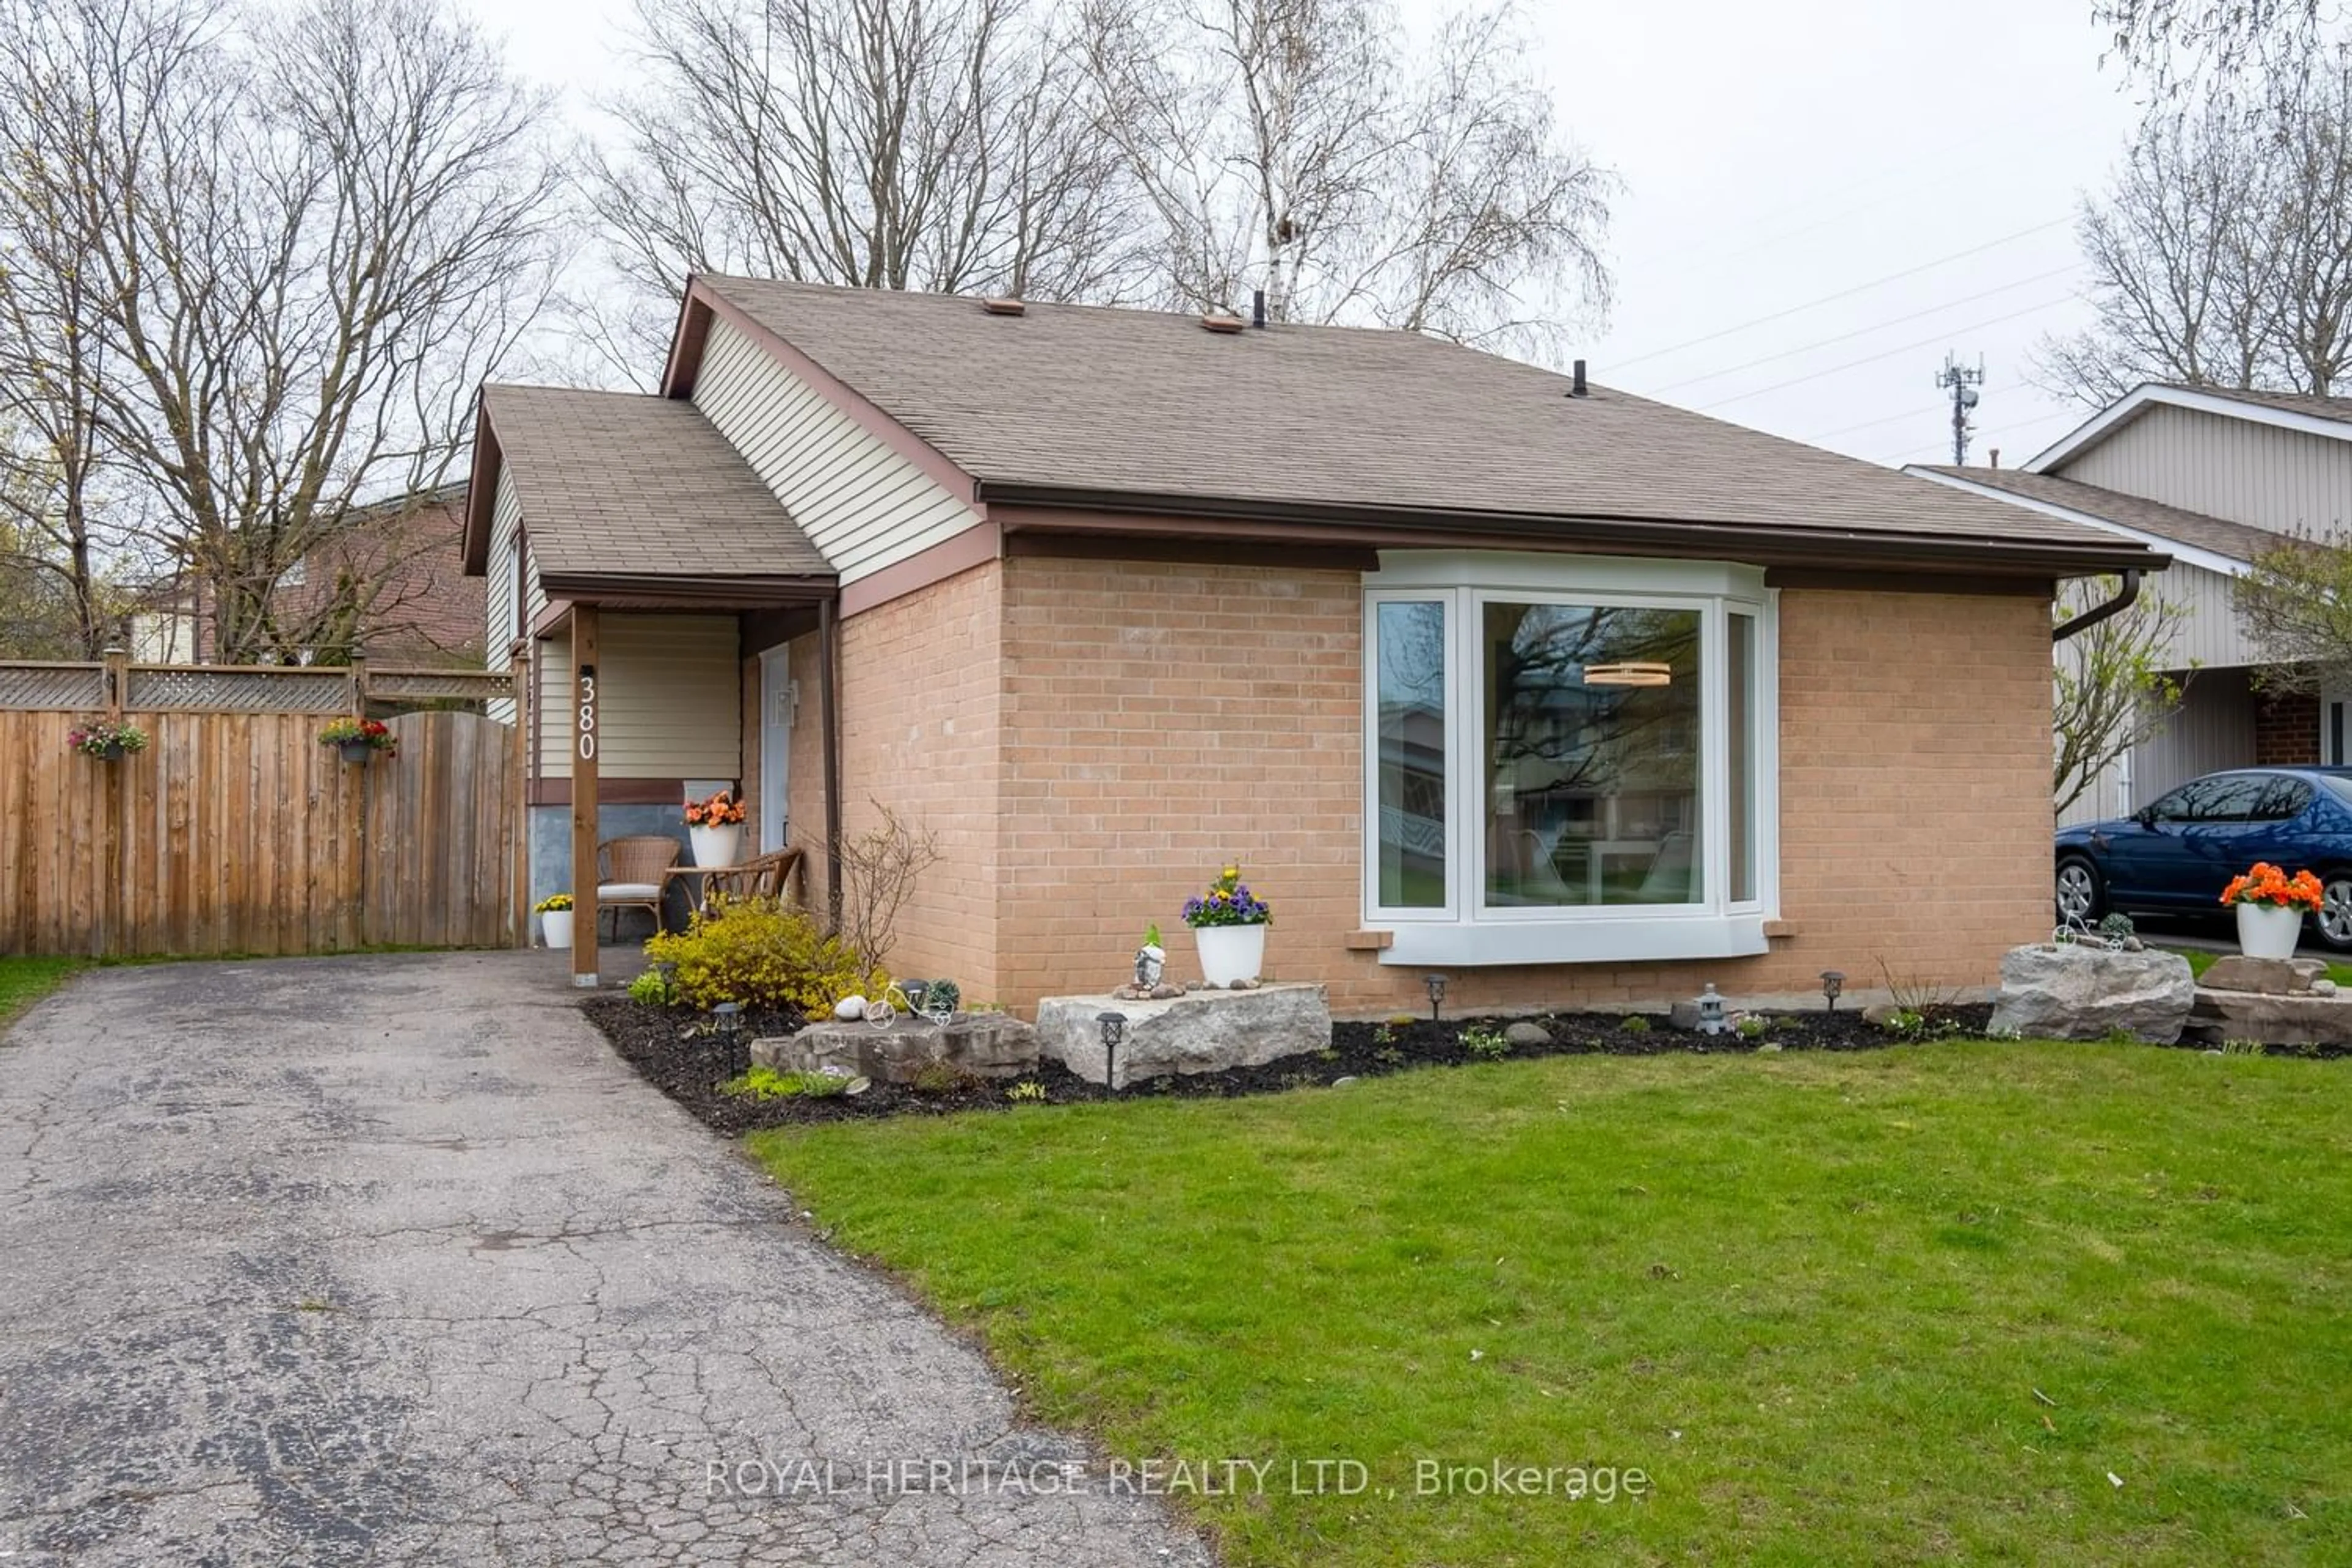 Frontside or backside of a home for 380 Burnley Crt, Oshawa Ontario L1G 7G6